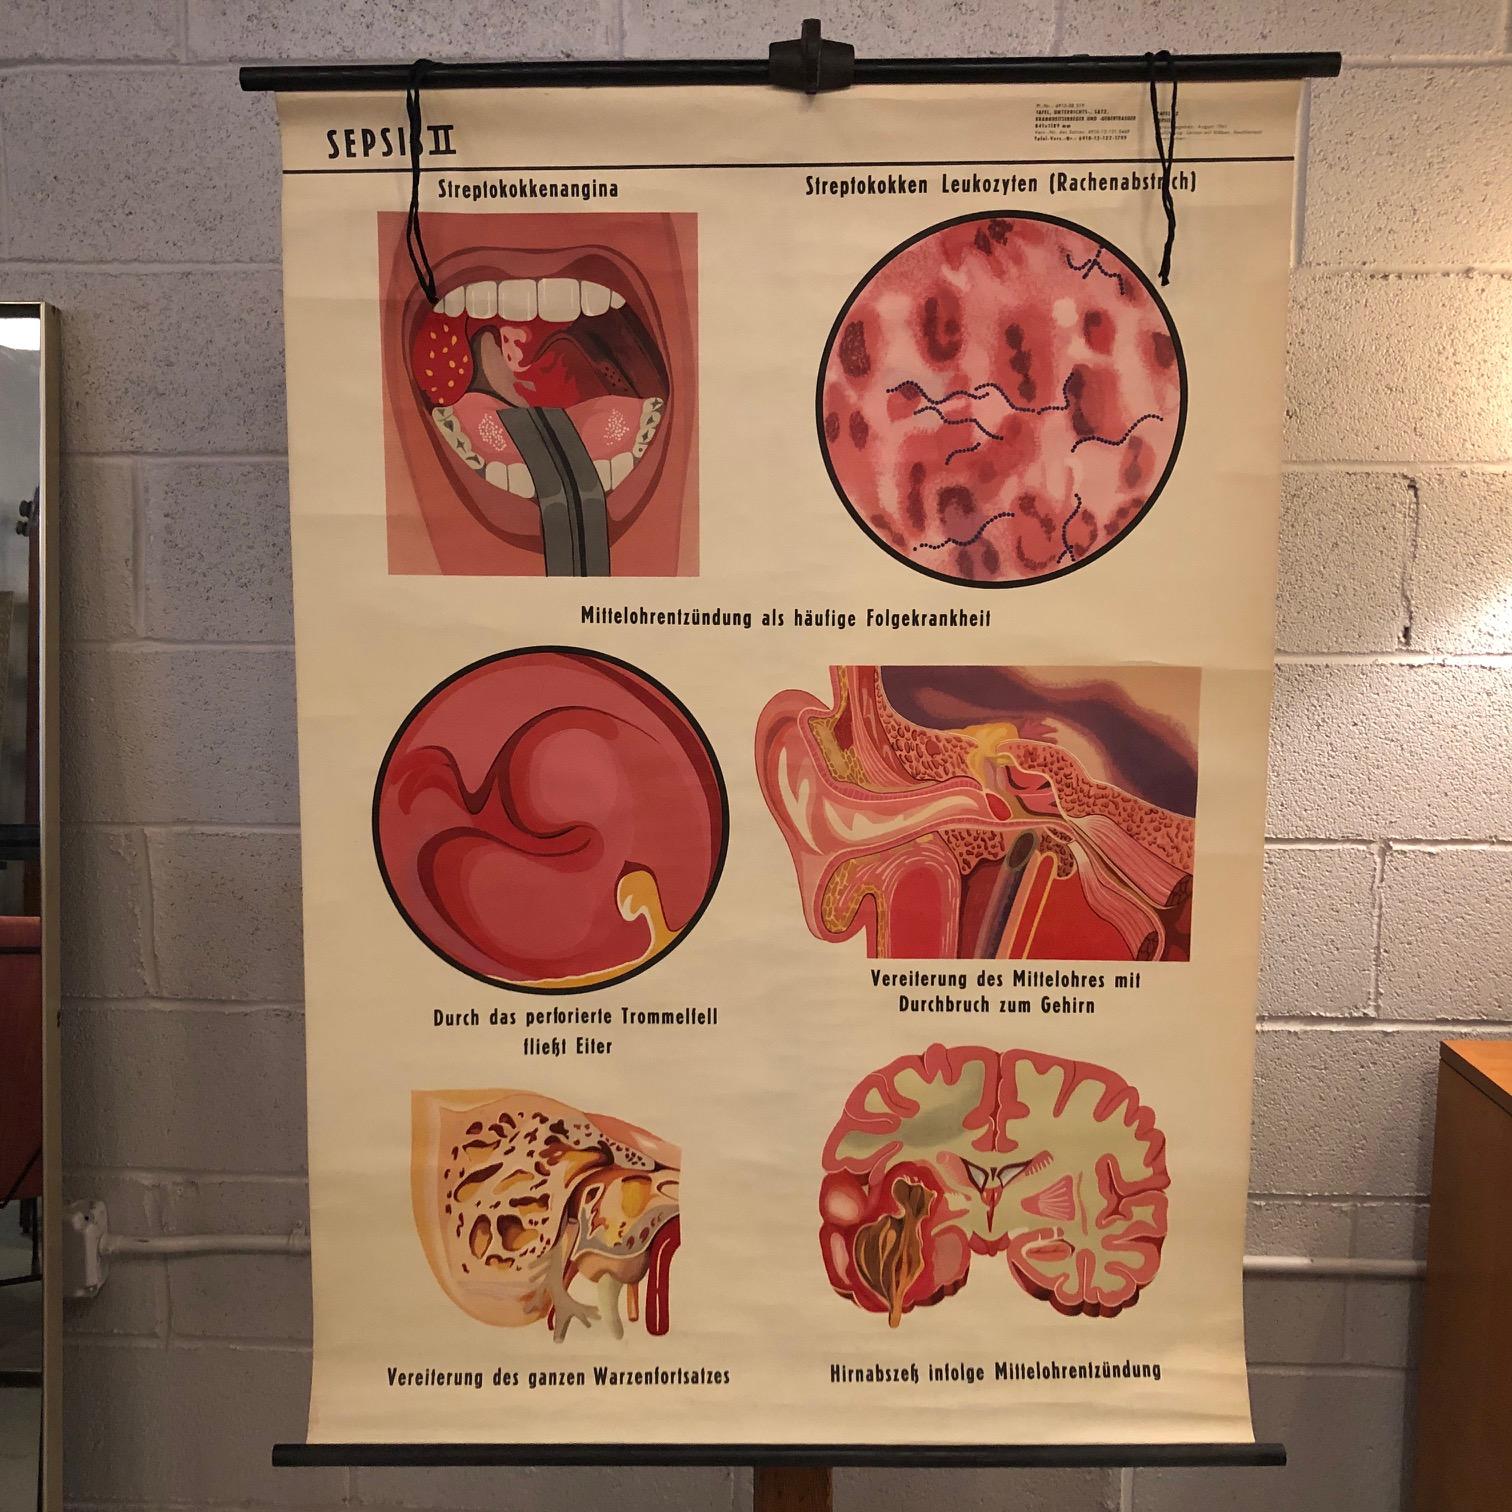 German, educational, anatomical, roll-up, chart Sepsis II Medical Study chart the depicting the stages of the bacterial infection is printed on canvas backed paper with maple rods with ring for hanging.